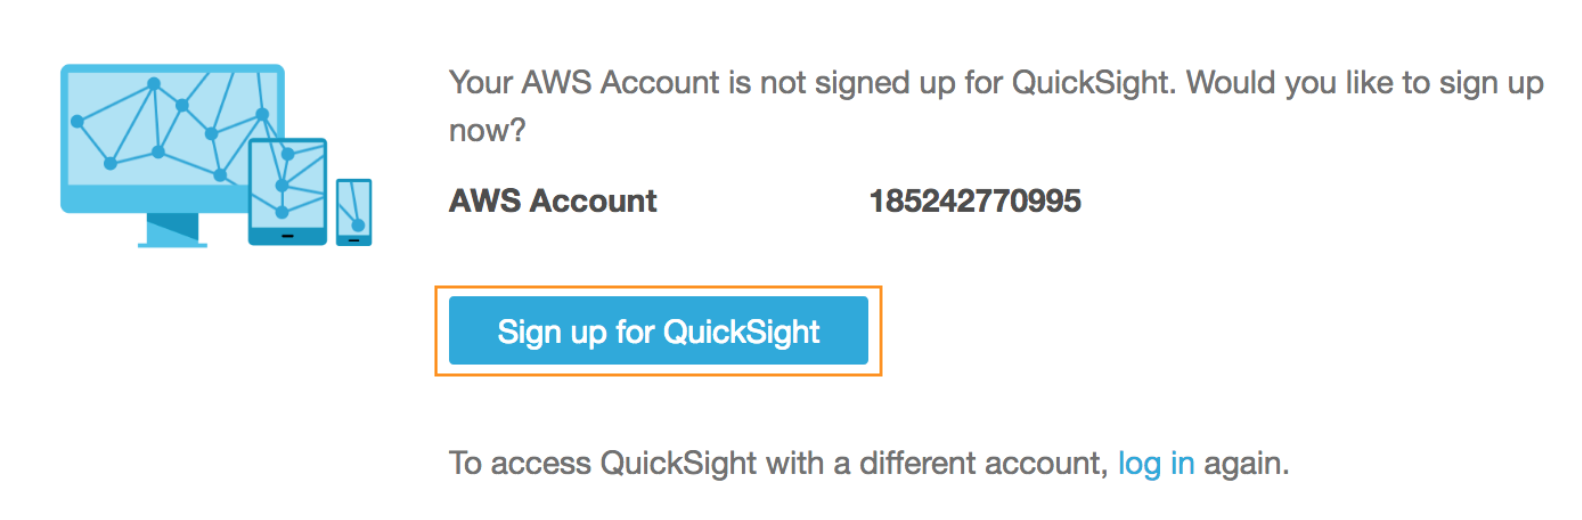 quicksight-signup.png